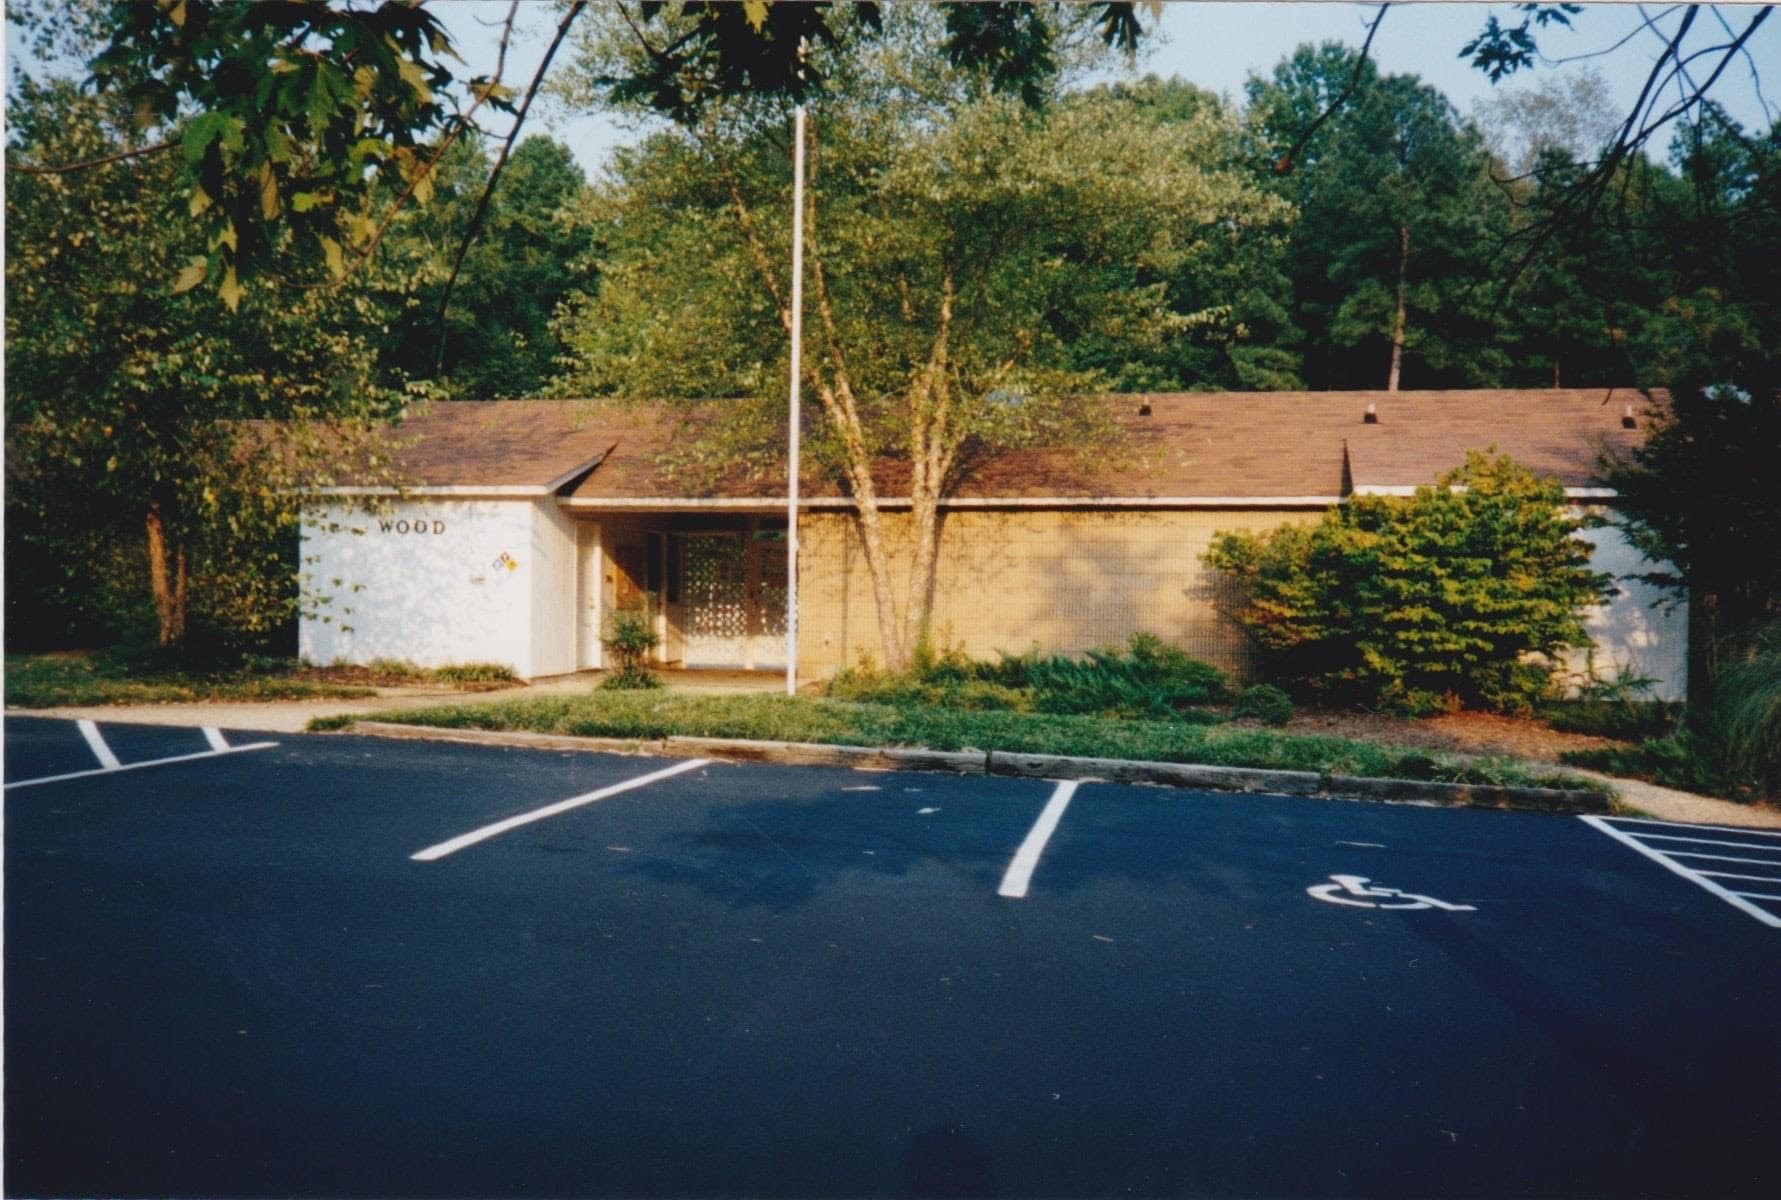 https://www.woodvalleysrc.com/wp-content/uploads/2022/02/Old-Clubhouse-pre1999-Cropped.jpg